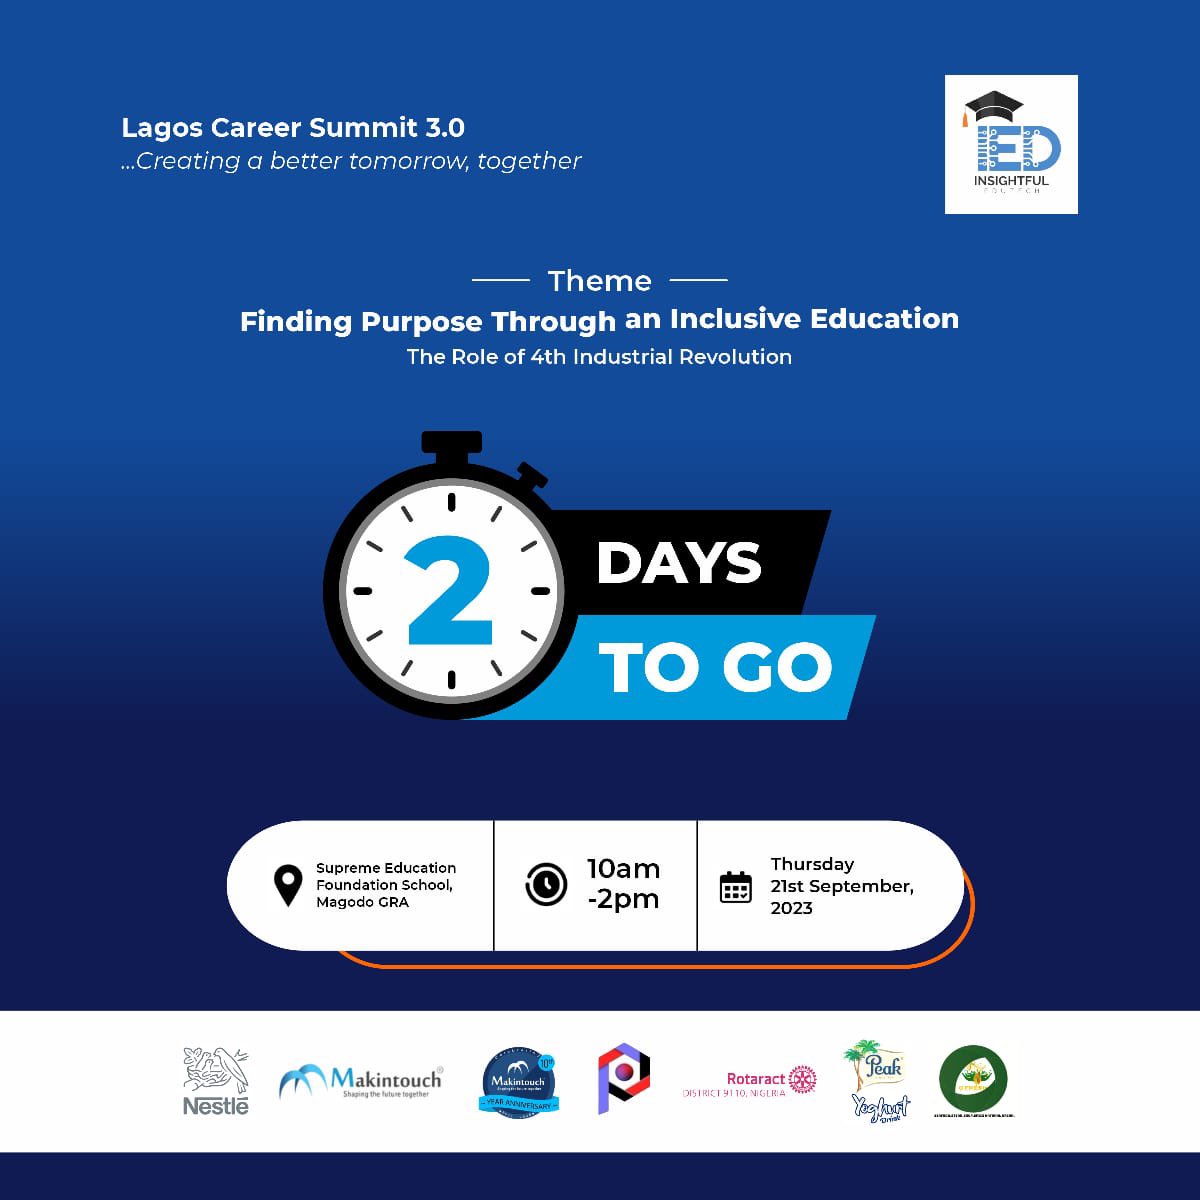 It’s the Lagos Career Summit 3.0 Join in on the conversation as we engage young students on “Finding Purpose Through an Inclusive Education: The Role of 4th Industrial Revolution” Amazing Speakers || Detailed Panel Discussants 🥶🤩 #InclusiveEducation #QualityEducation #SDG4